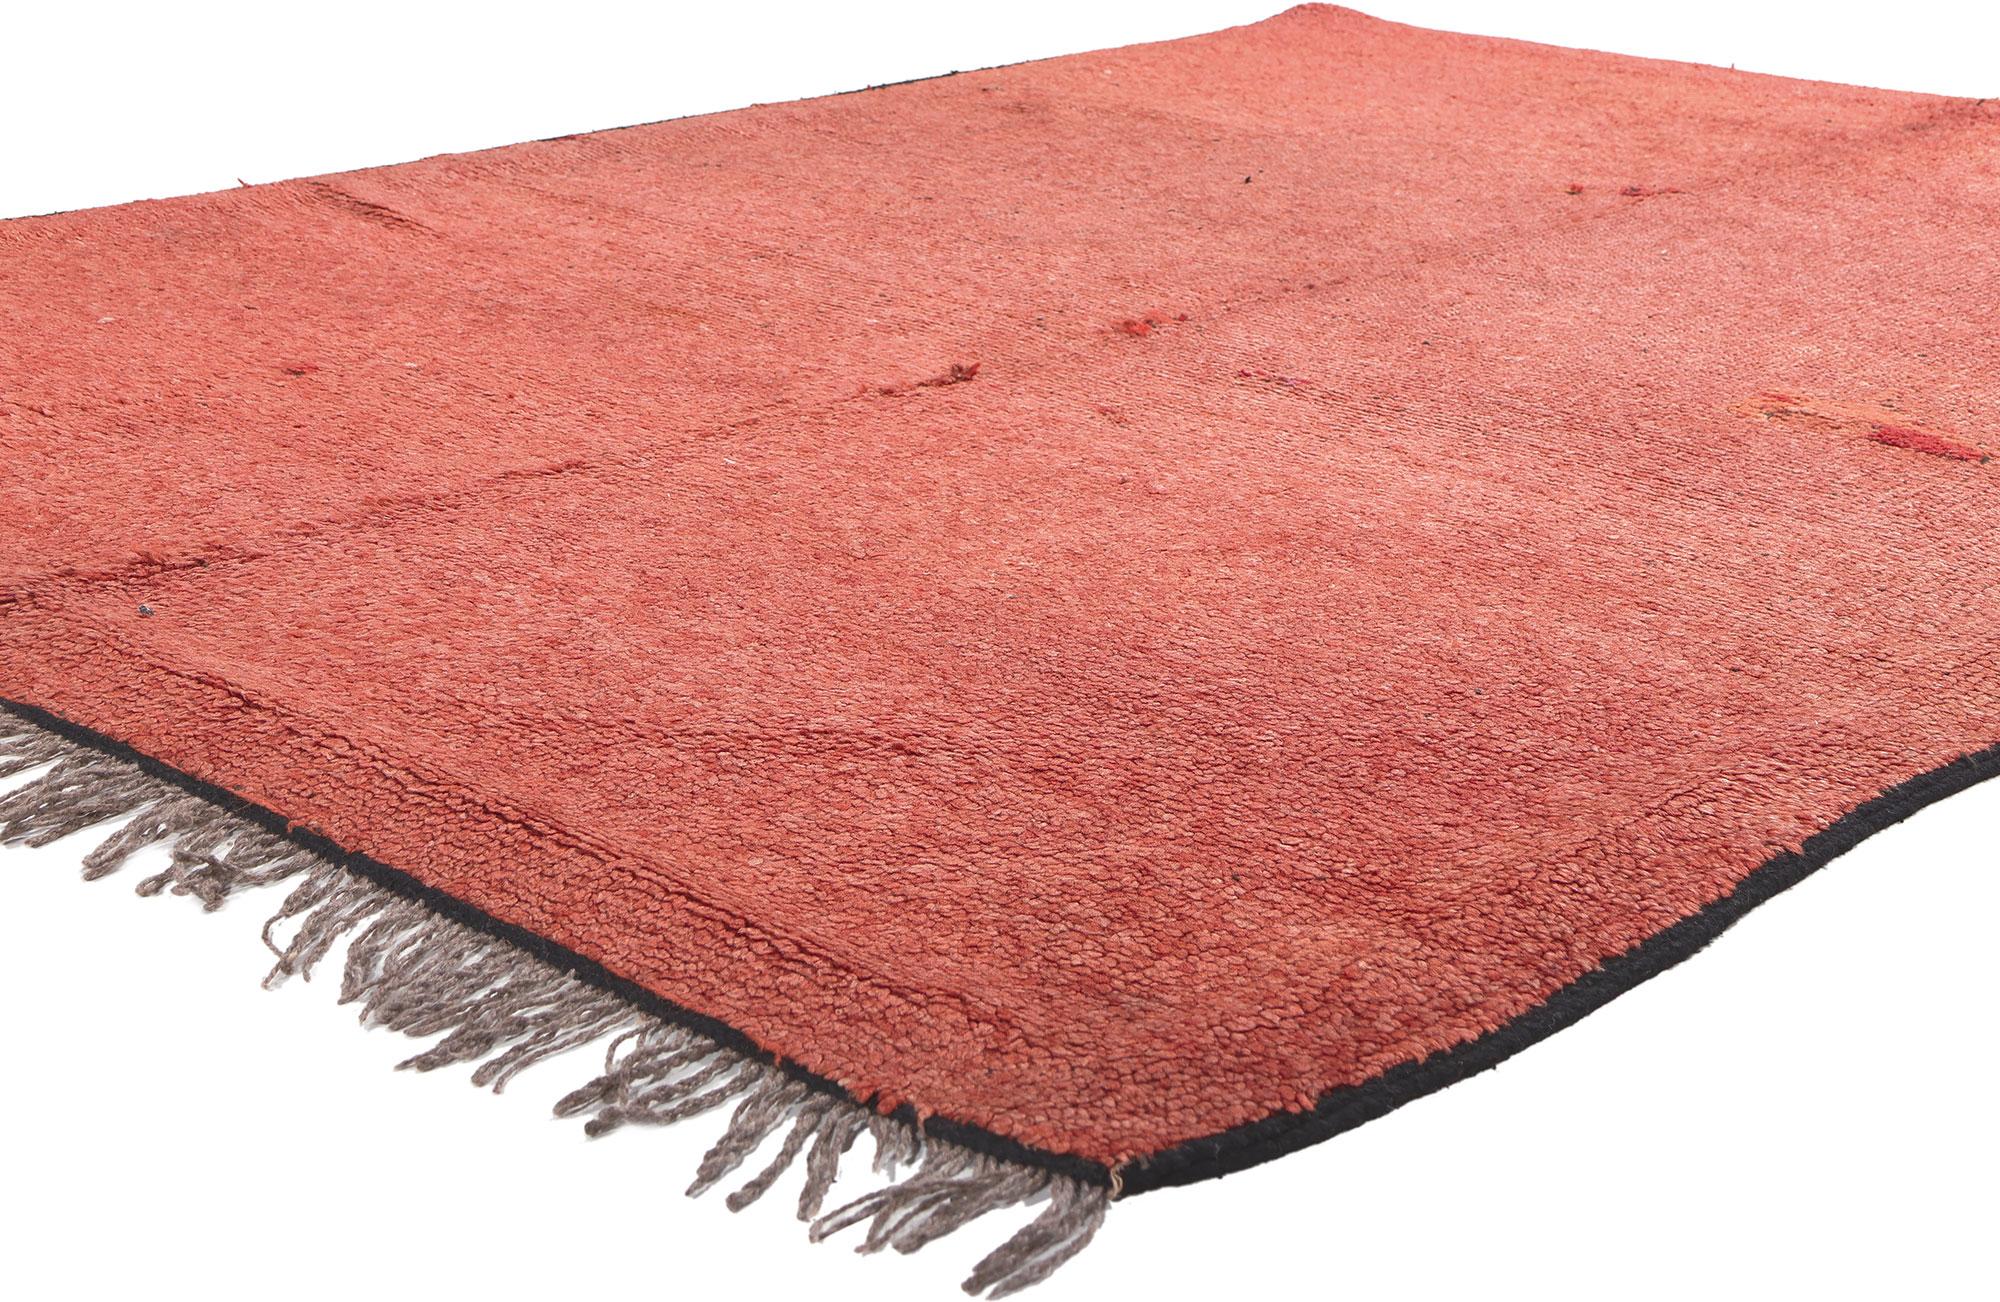 20045 Vintage Berber Moroccan Rug, 05'06 X 07'08. 
​Immerse yourself in the tactile richness of this hand-knotted wool vintage Berber Moroccan rug, where a solid plane of rustic brick red abrash elegantly sprawls across the field. Beyond being a